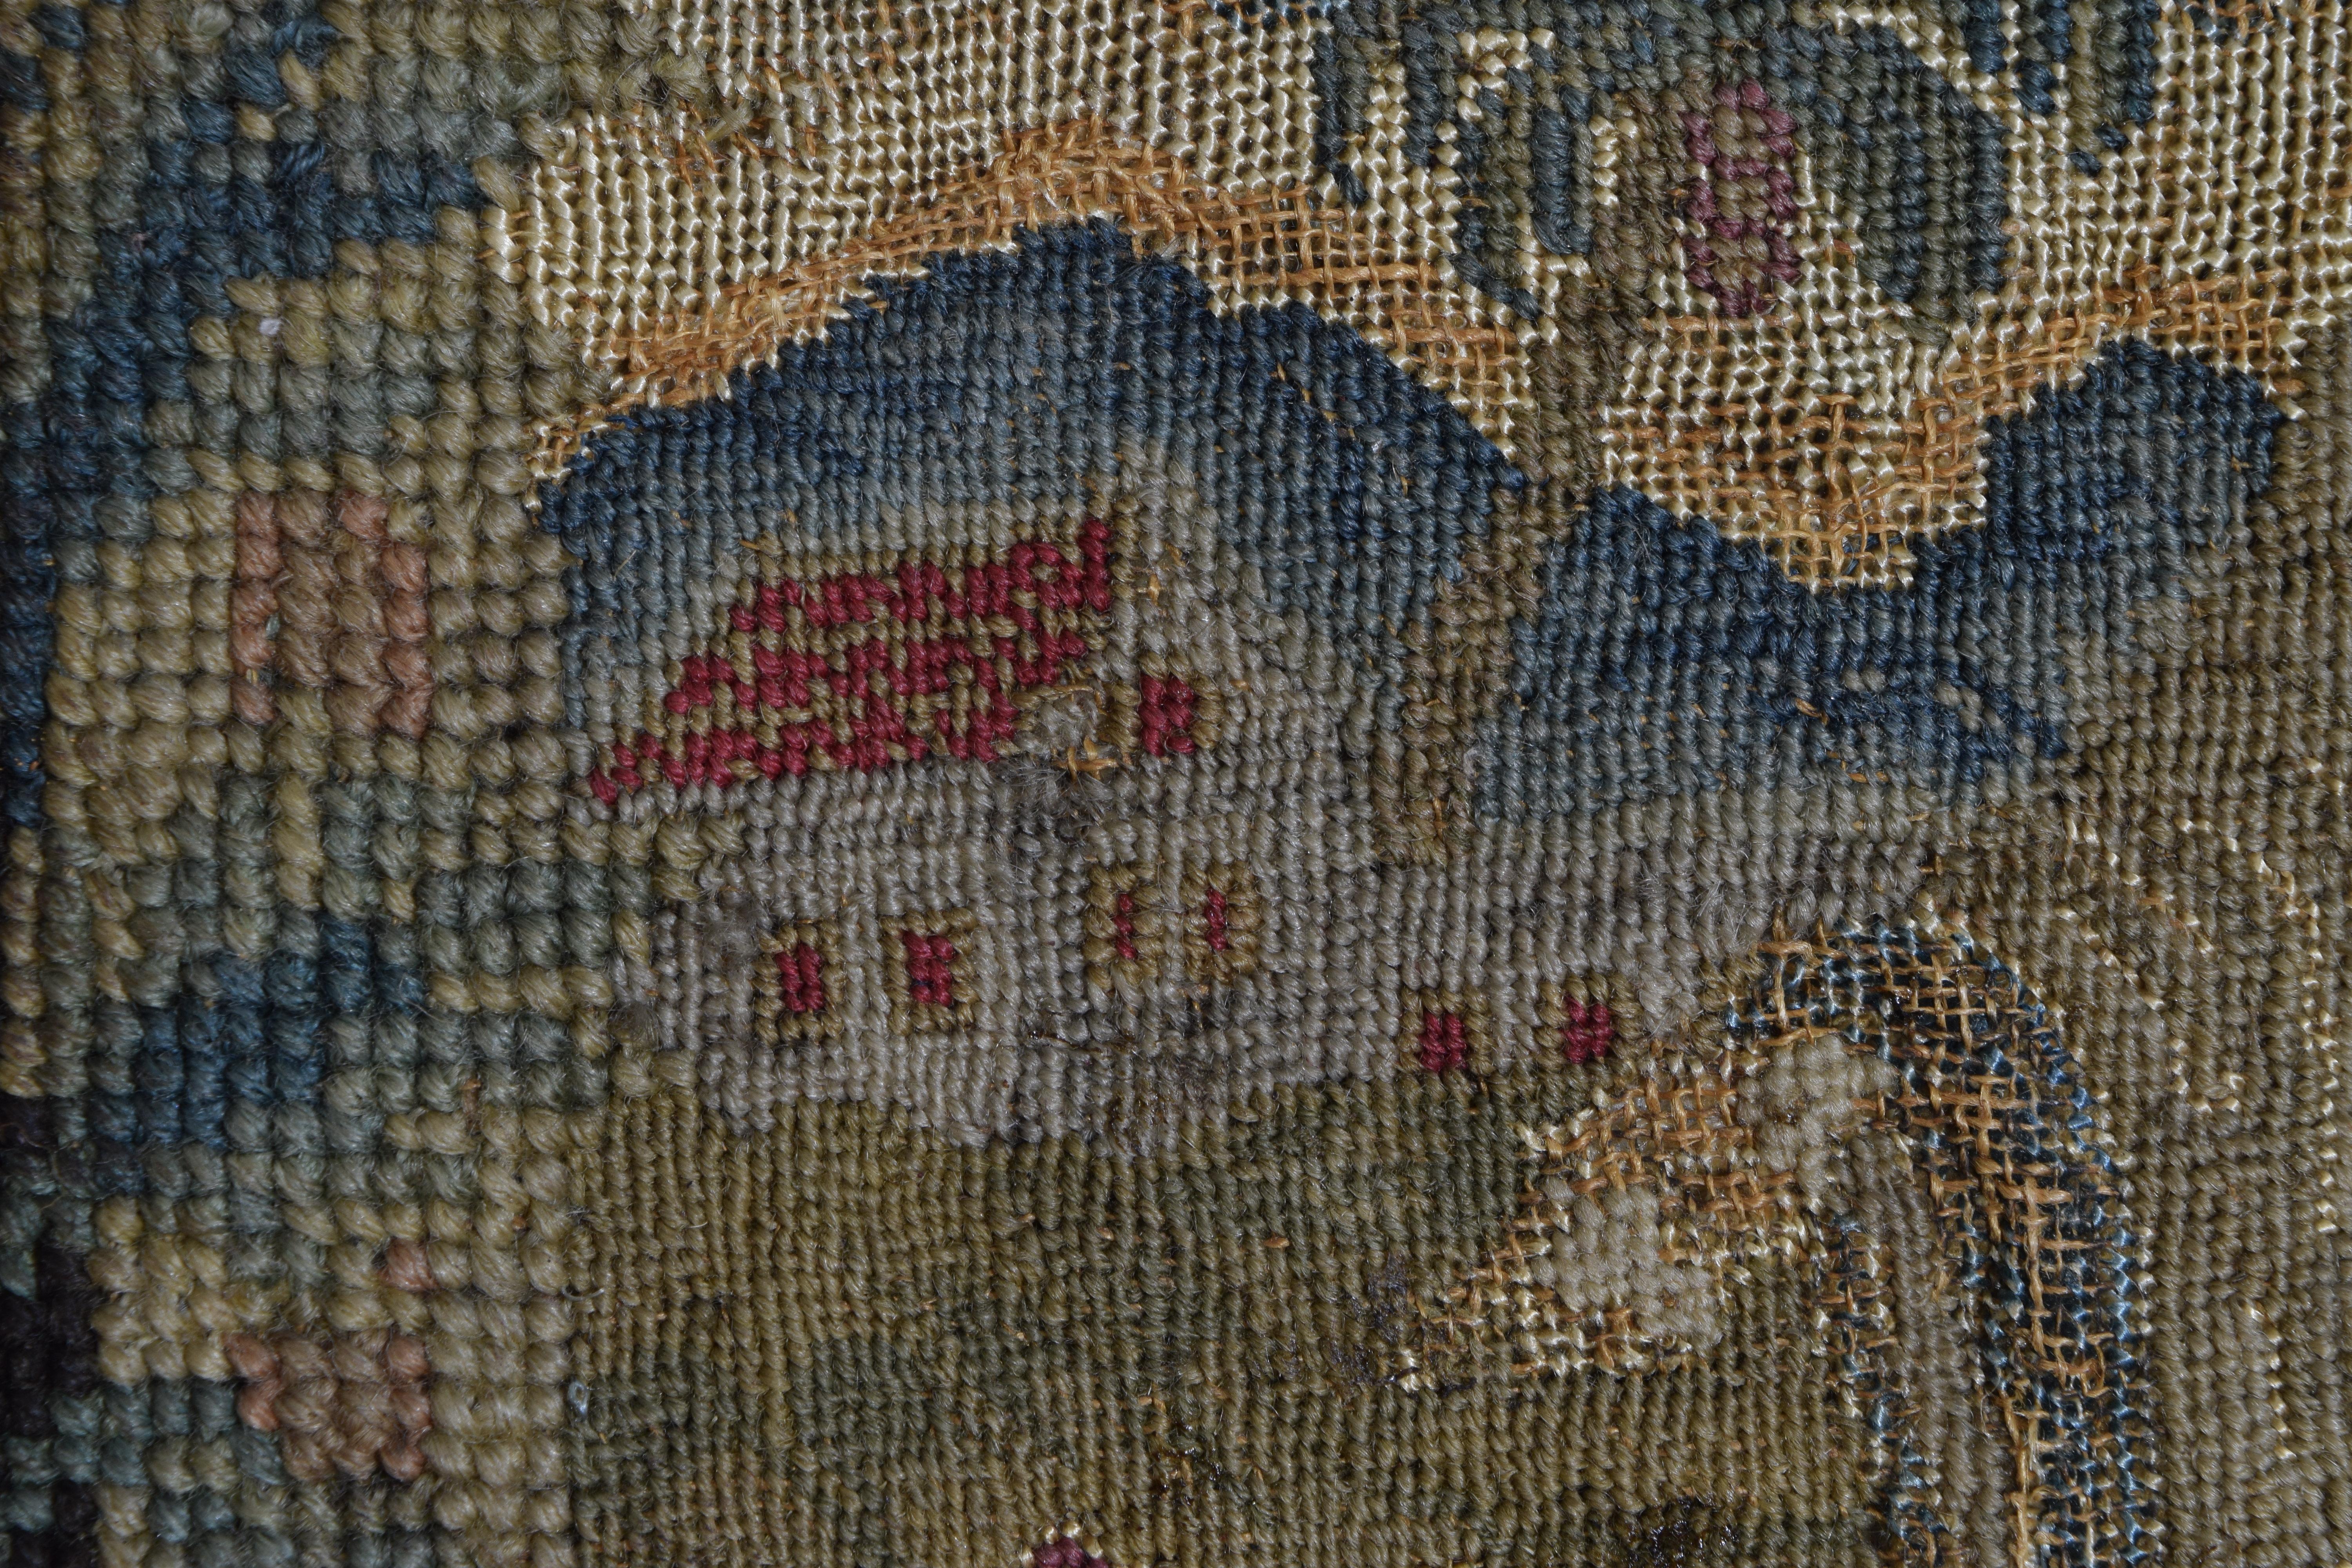 Conintental Frame Tapestry Fragement, Early 18th Century 1